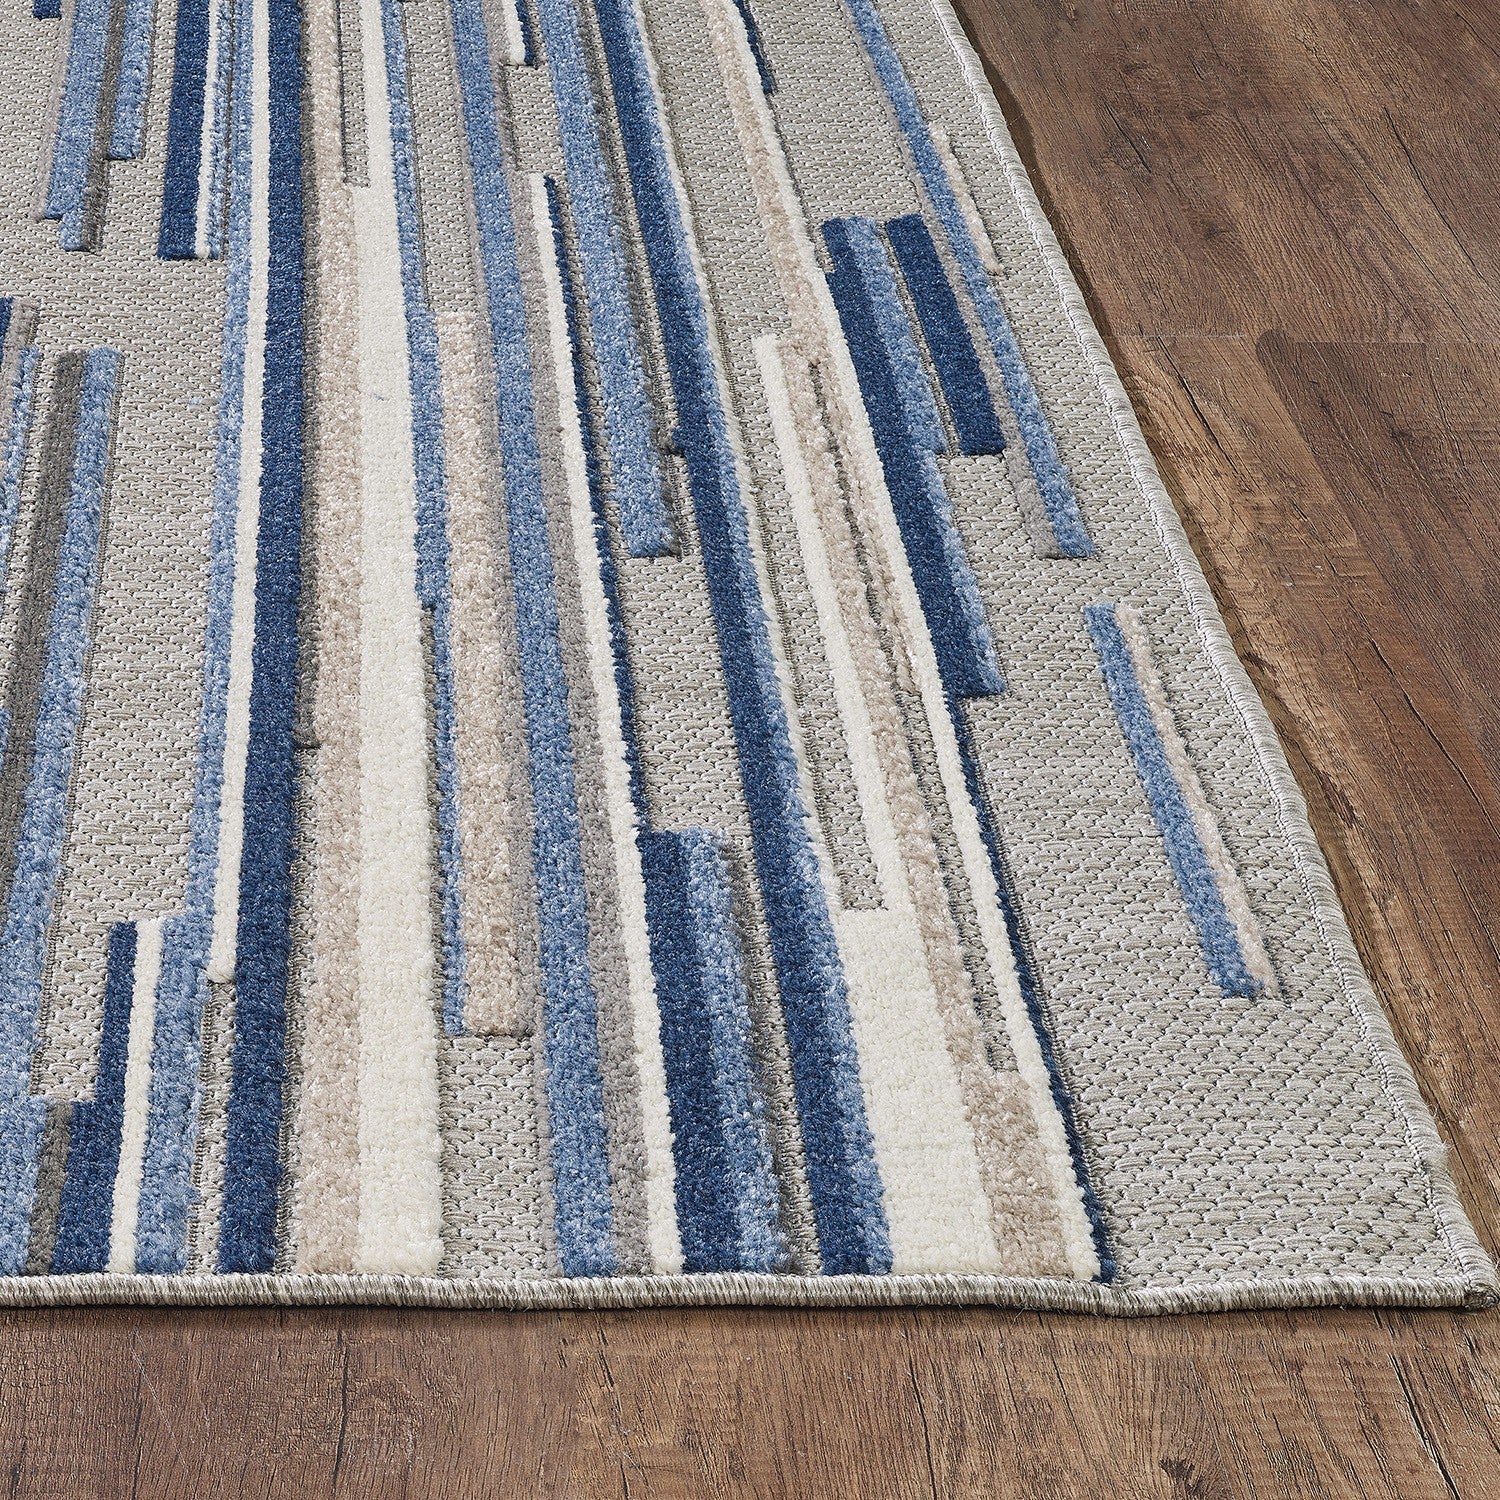 2' X 4' Blue Abstract Stain Resistant Indoor Outdoor Area Rug